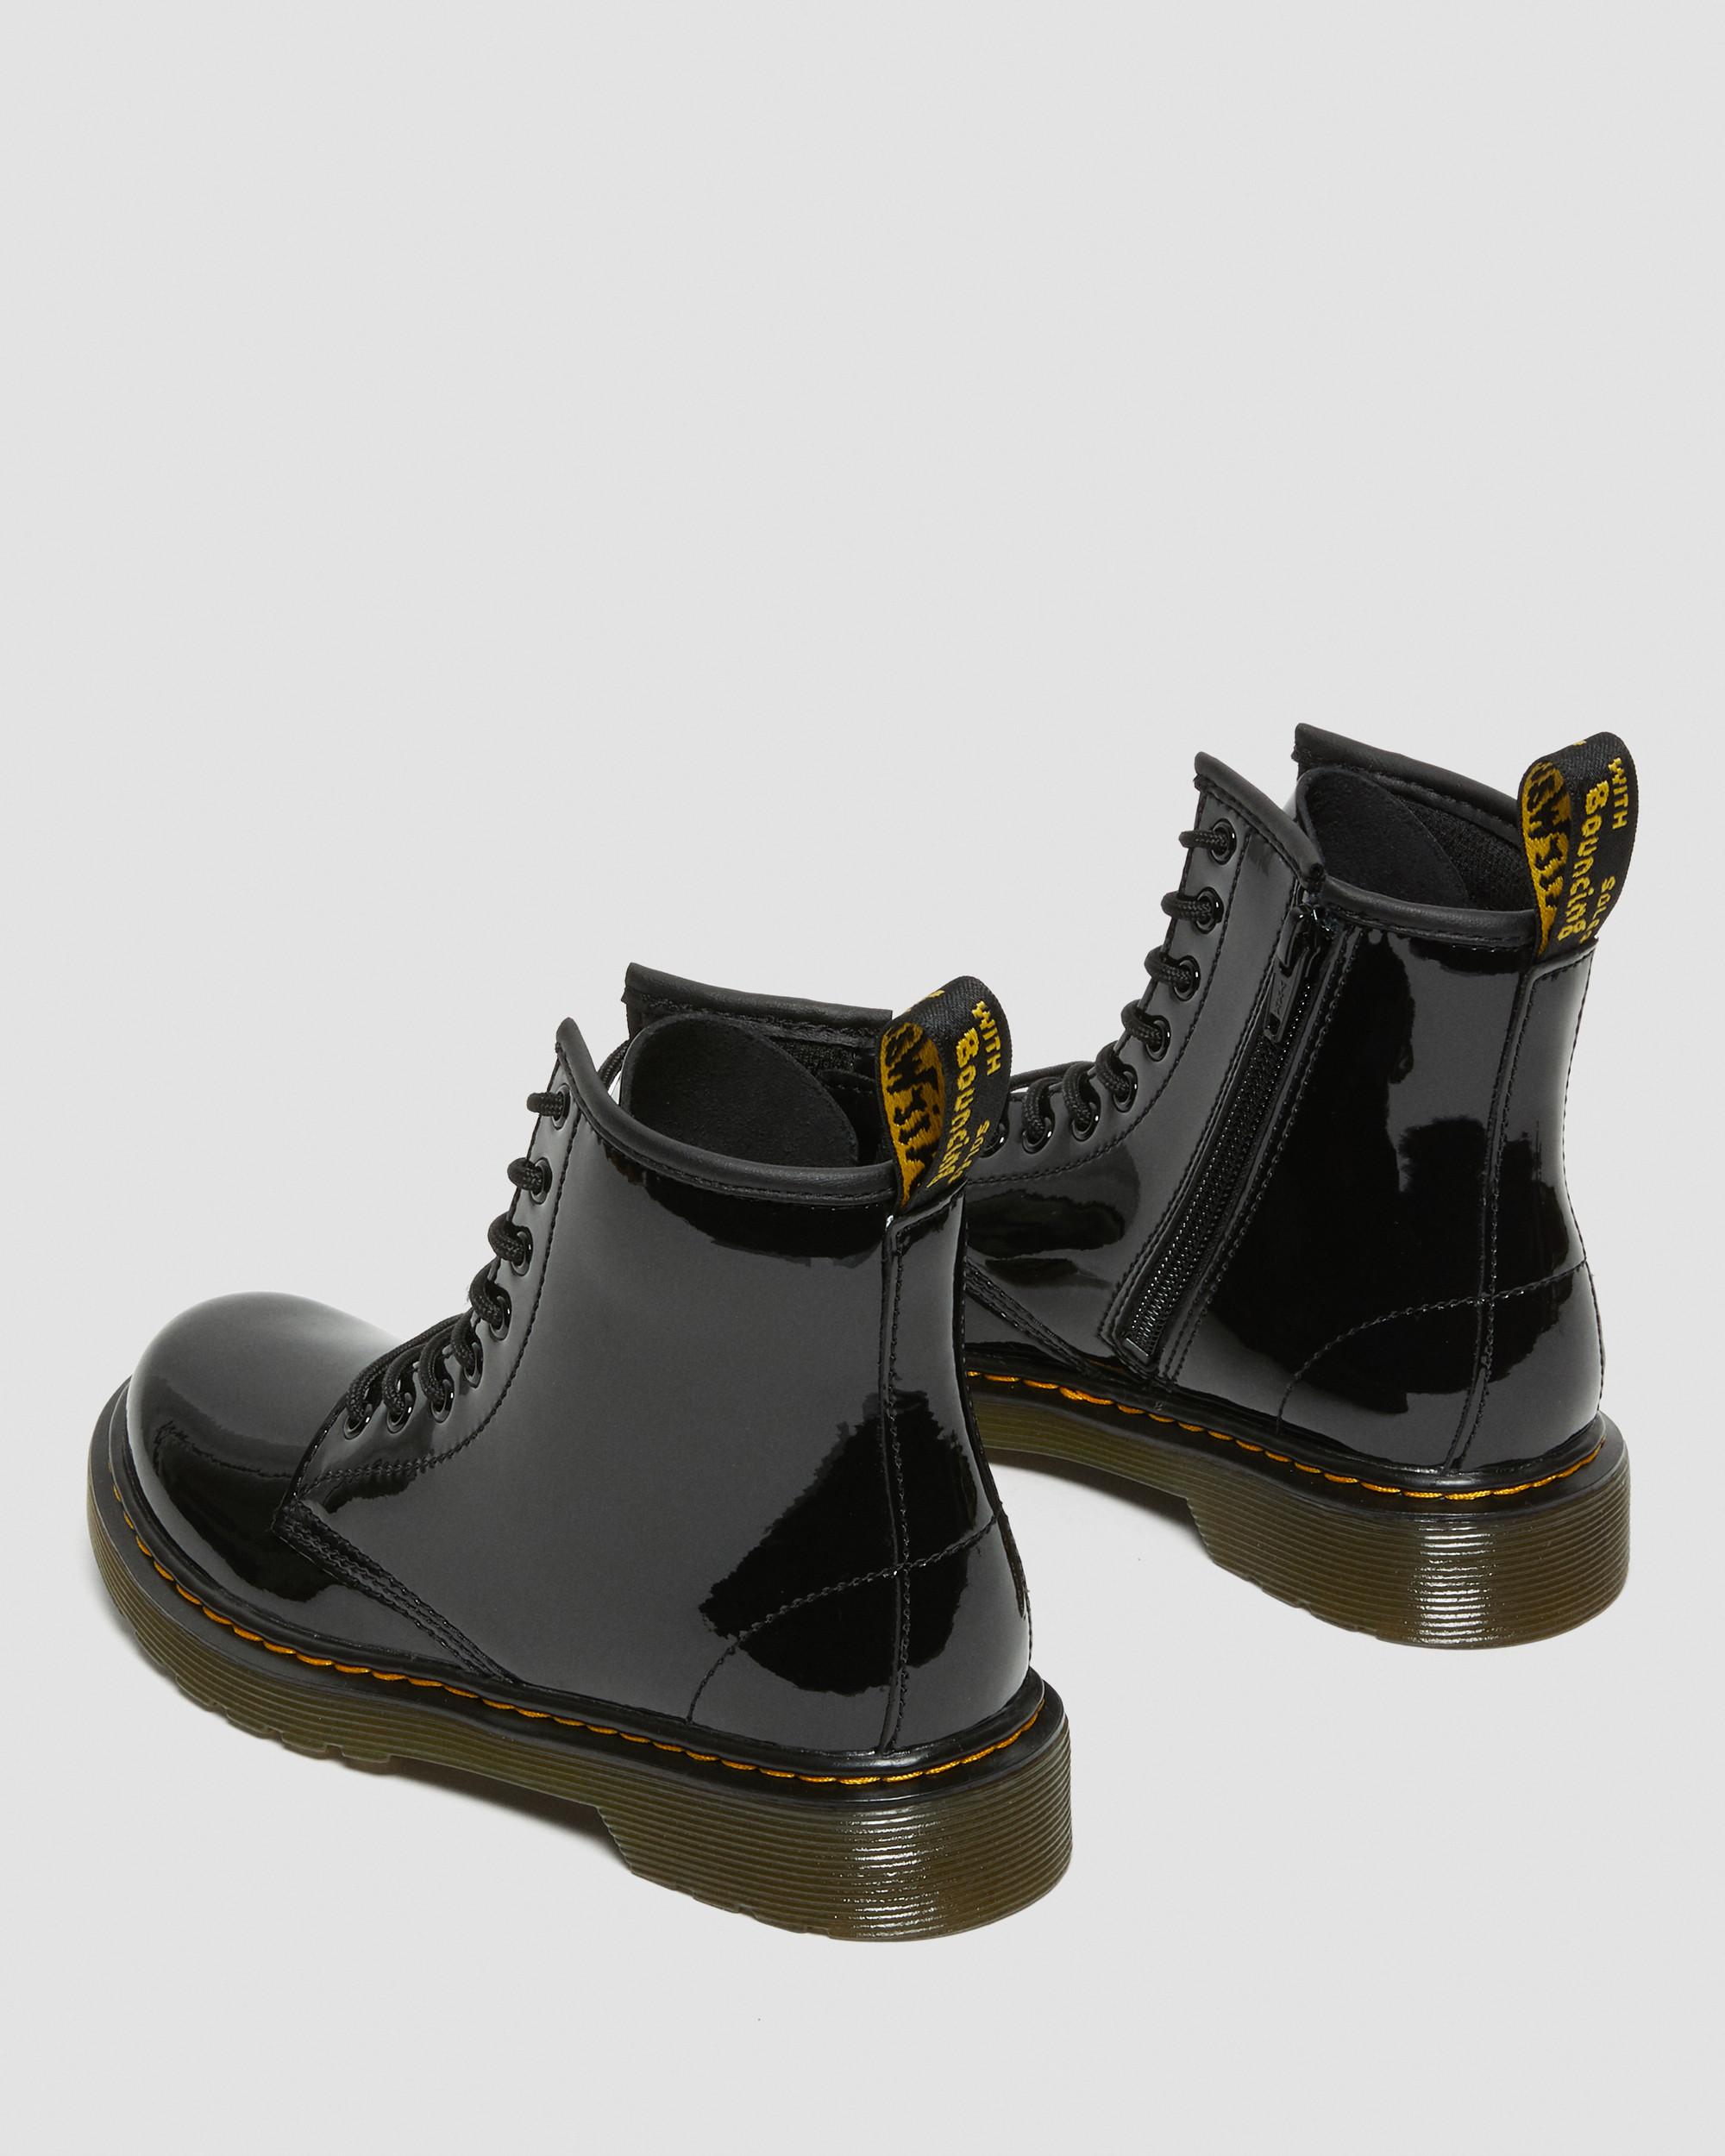 Junior 1460 Patent Leather Lace Up Boots in Black | Dr. Martens